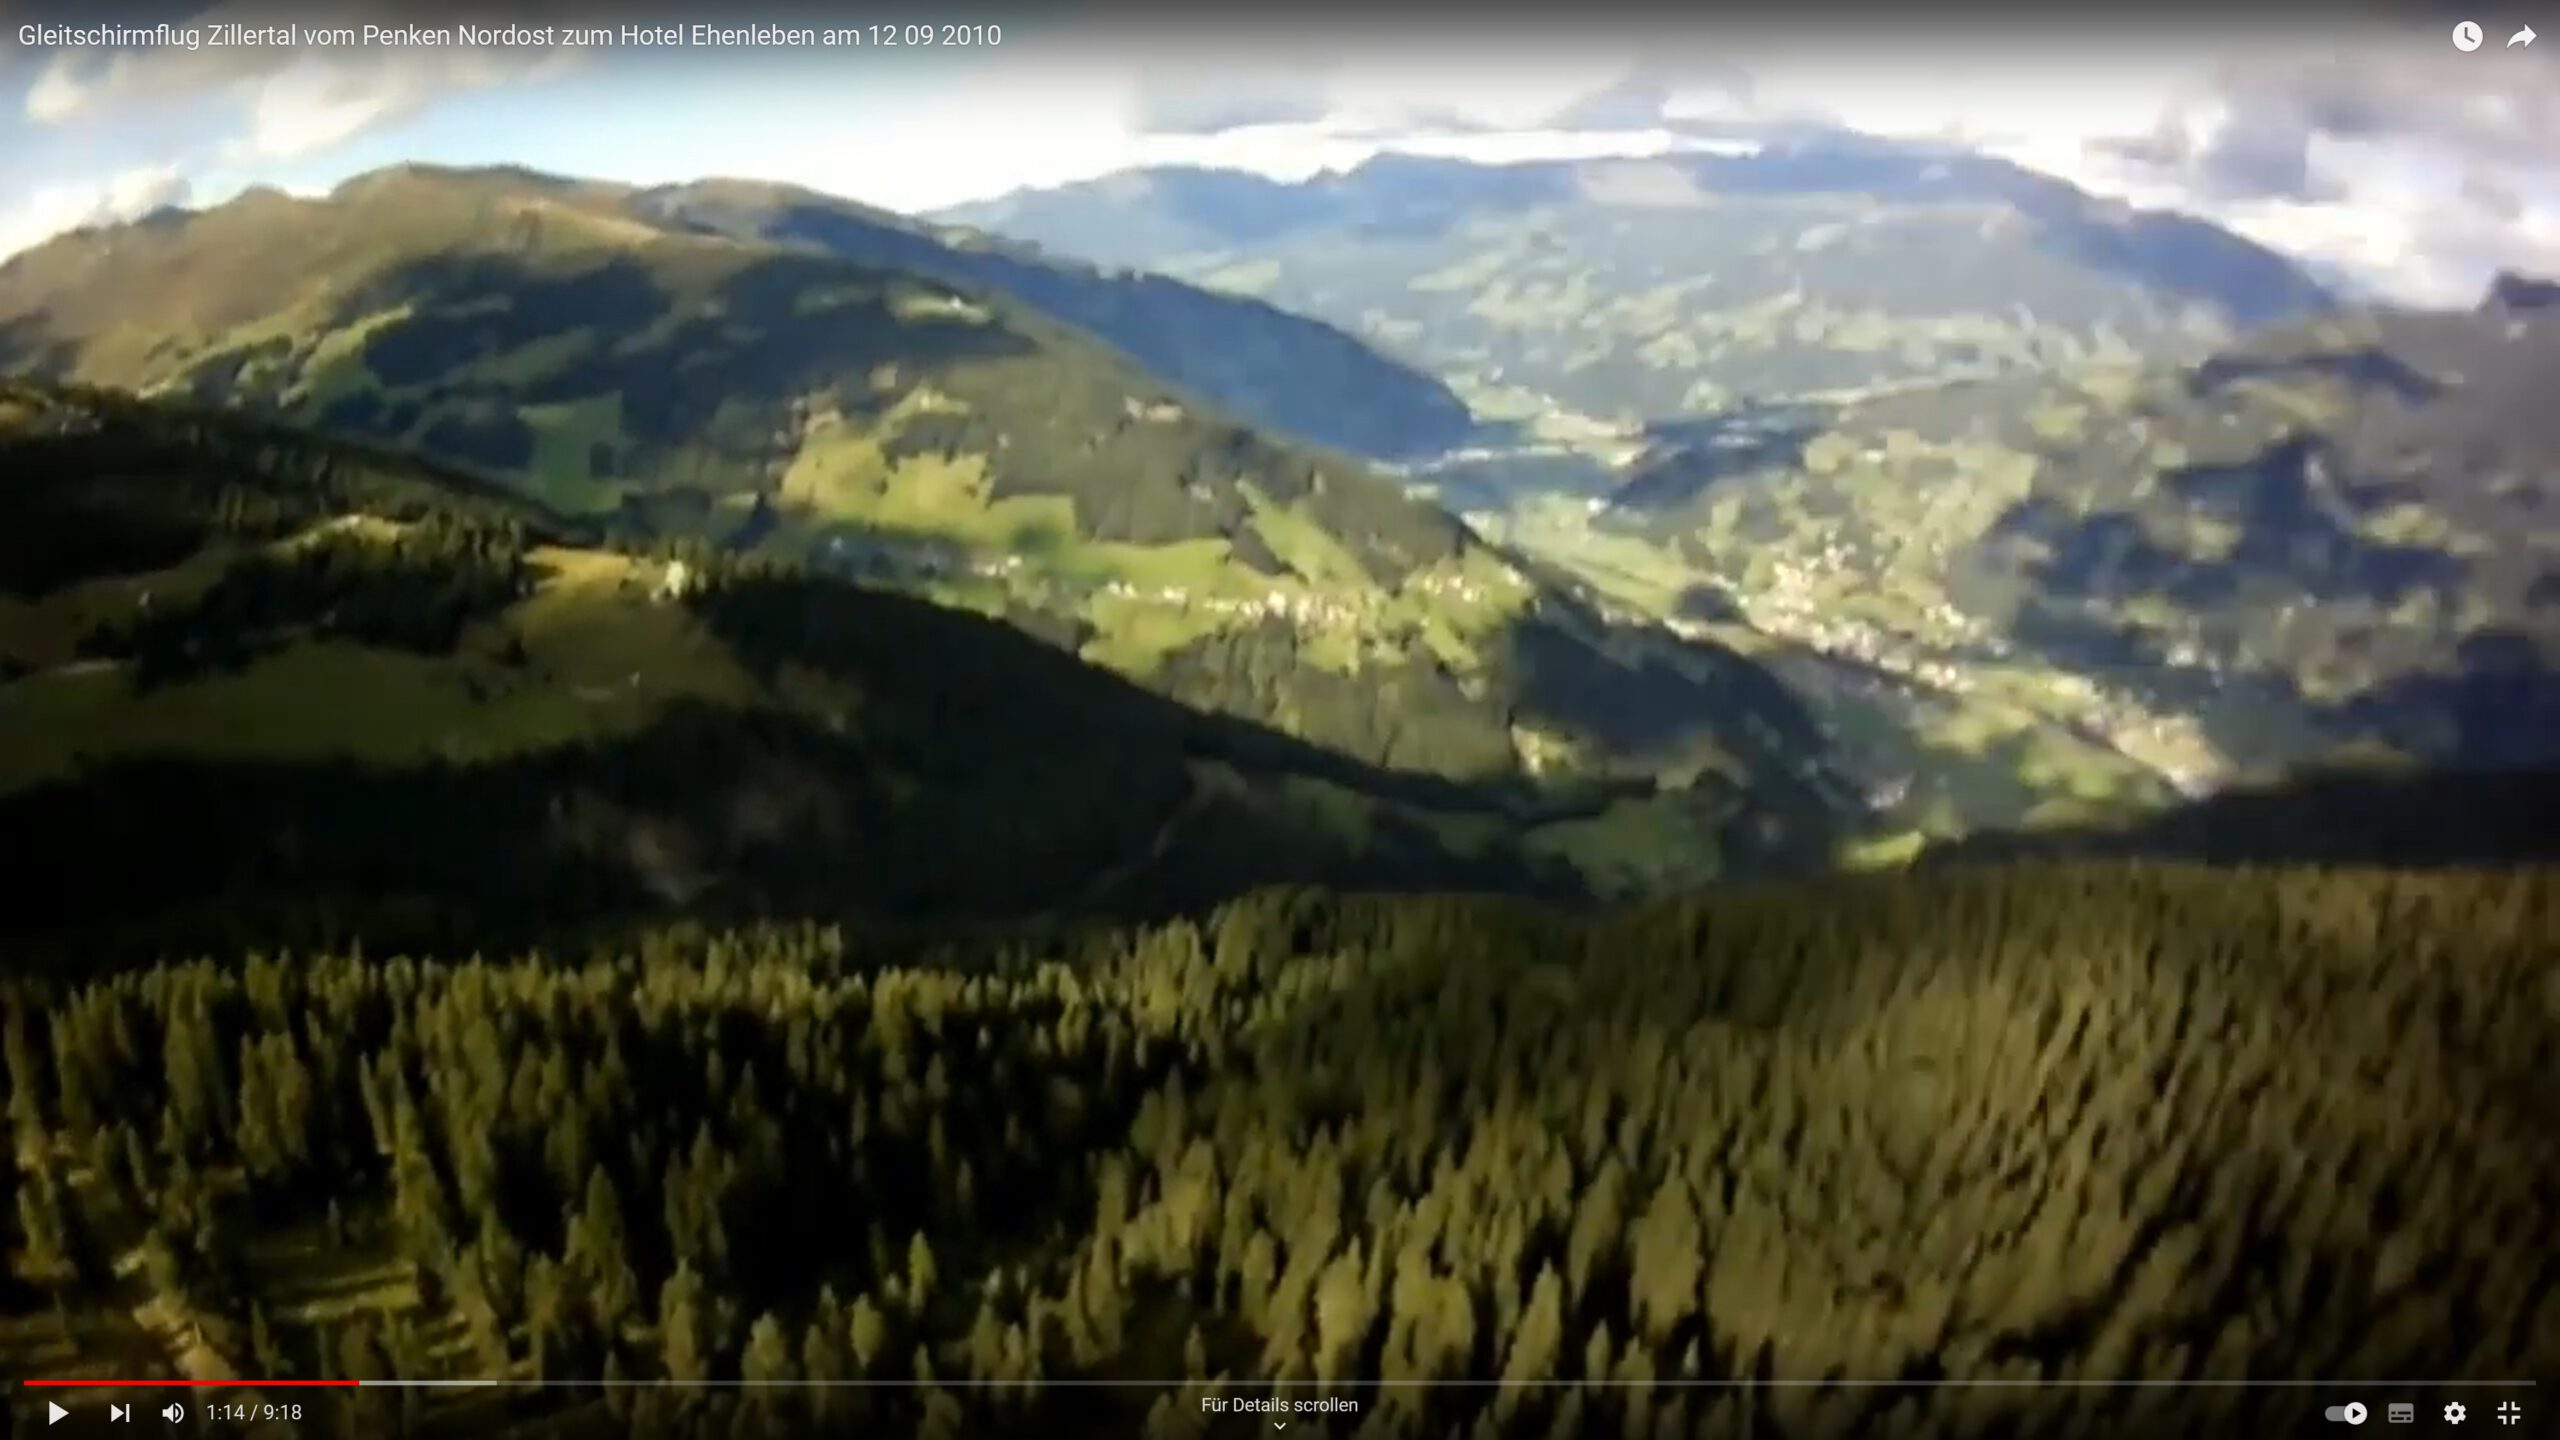 You are currently viewing Paragliding Zillertal from Penken Northeast to the Hotel Ehenleben